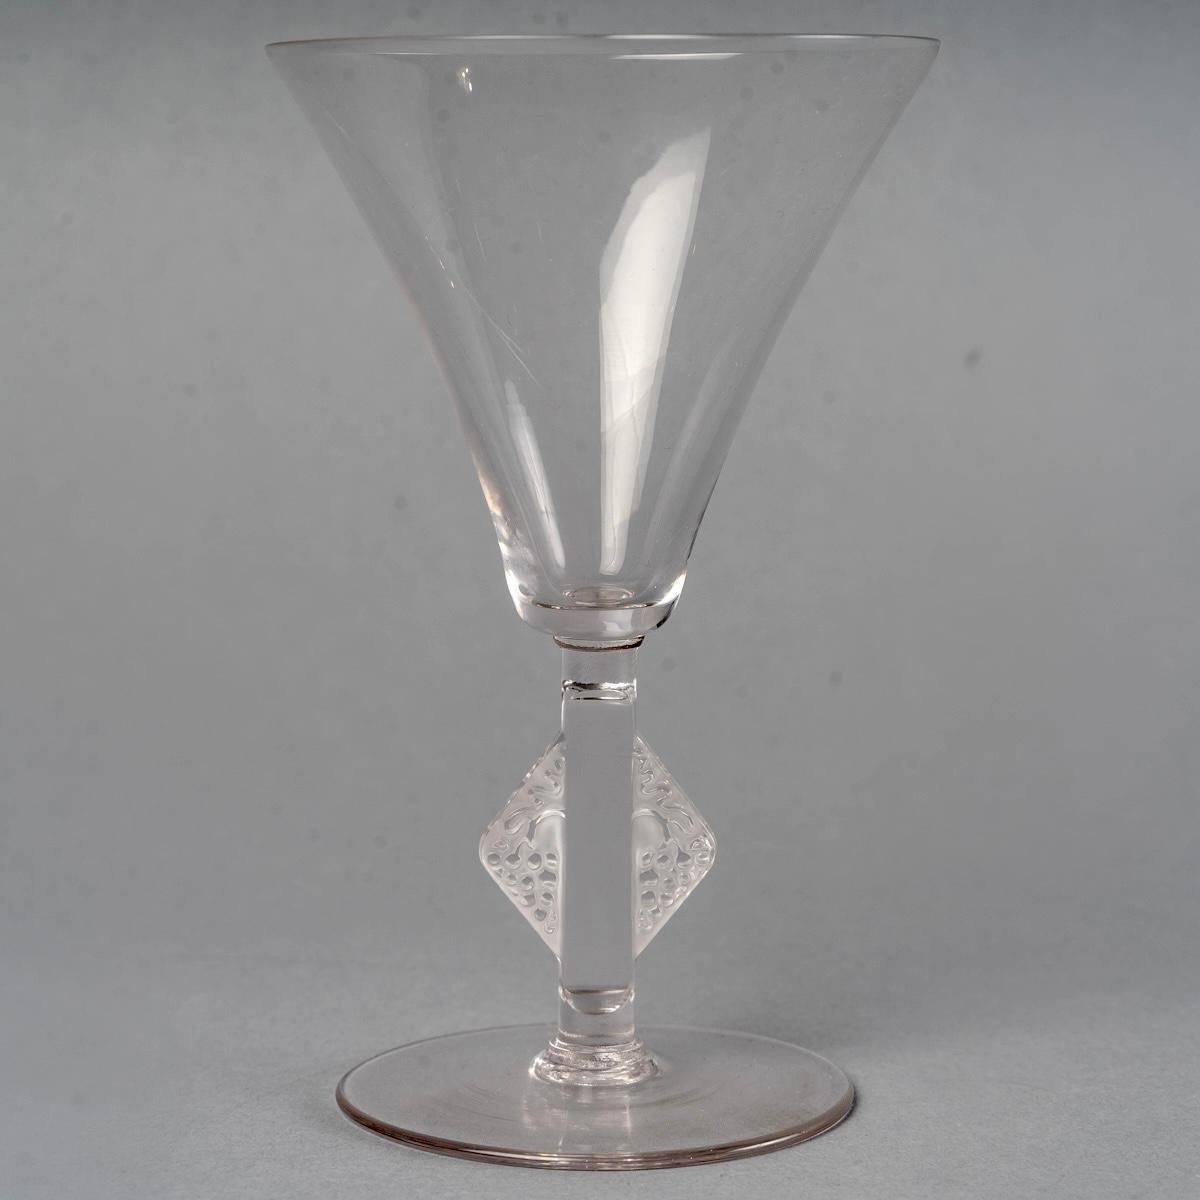 1924 René Lalique, Set of Tablewares Glasses Savergne Clear Glass, 34 Pieces In Good Condition For Sale In Boulogne Billancourt, FR